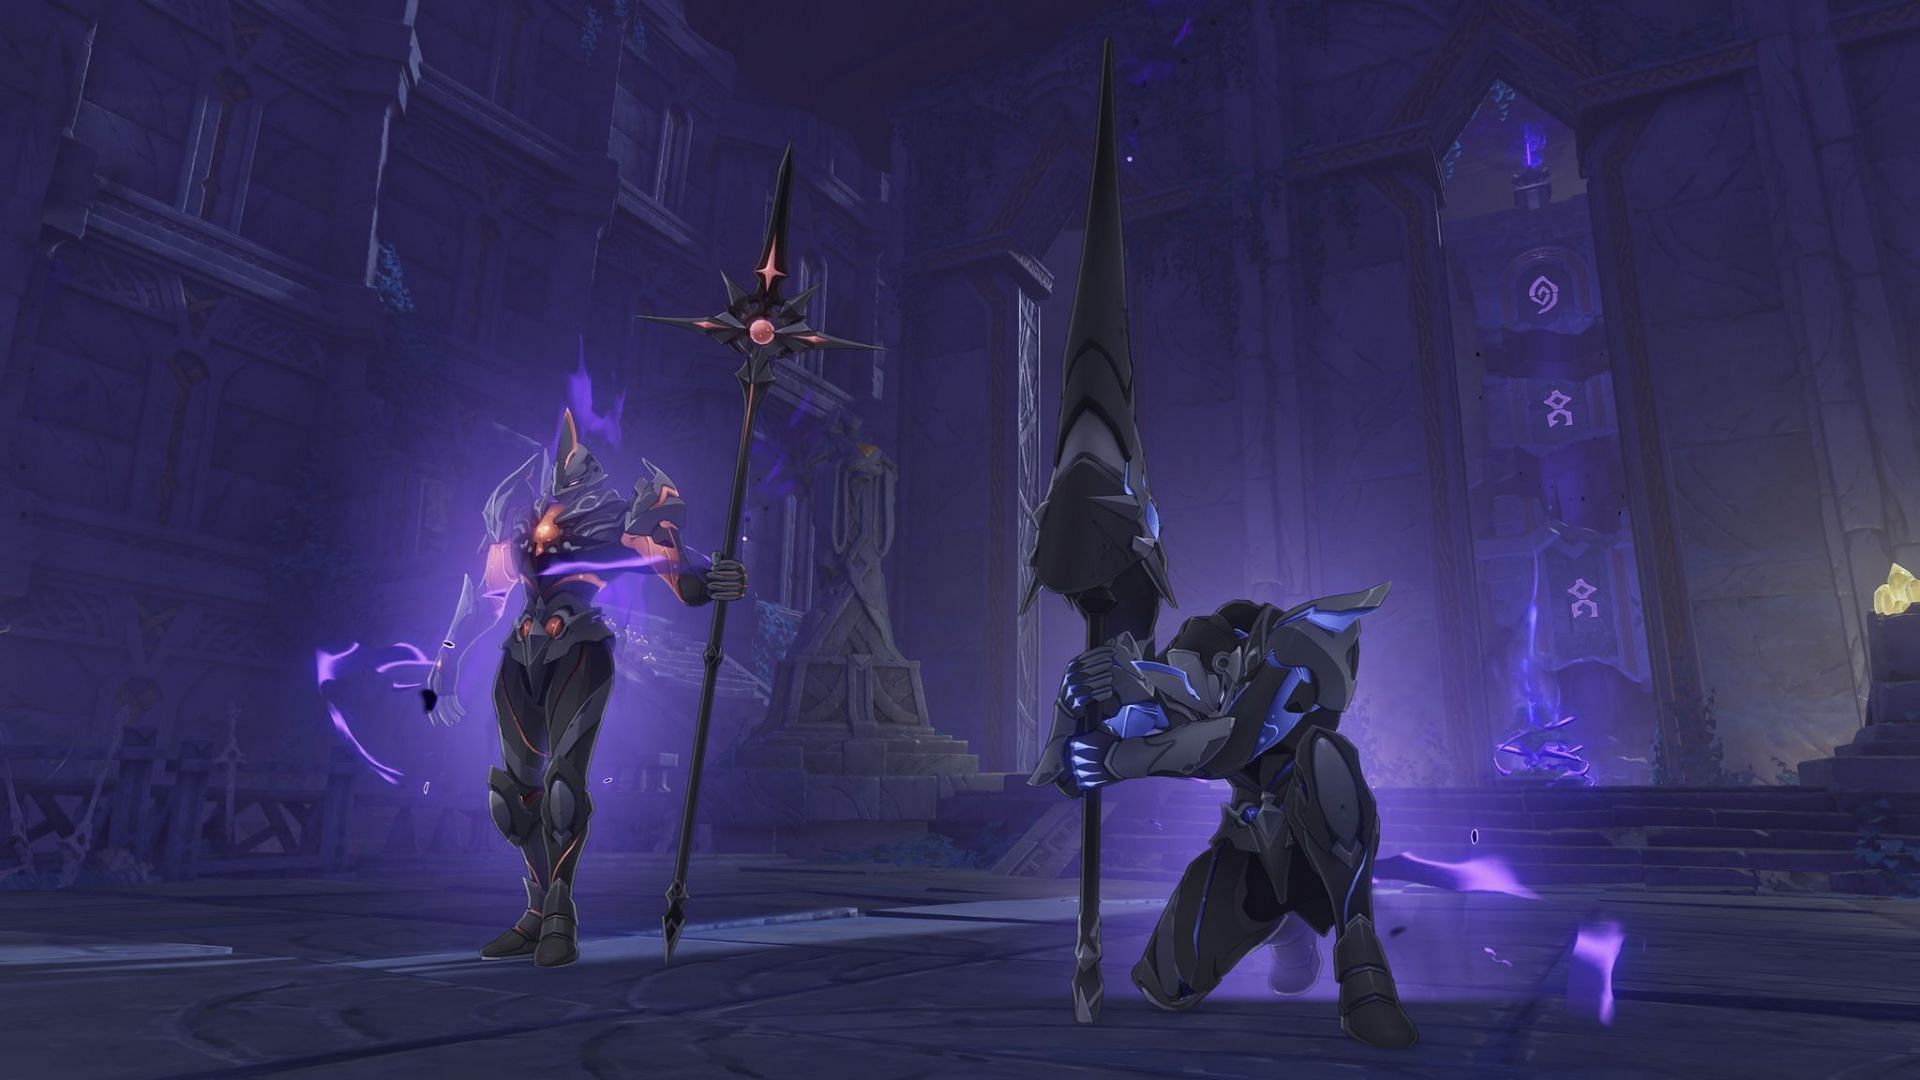 There will be a new enemy type known as Shadowy Husks (Image via miHoYo)